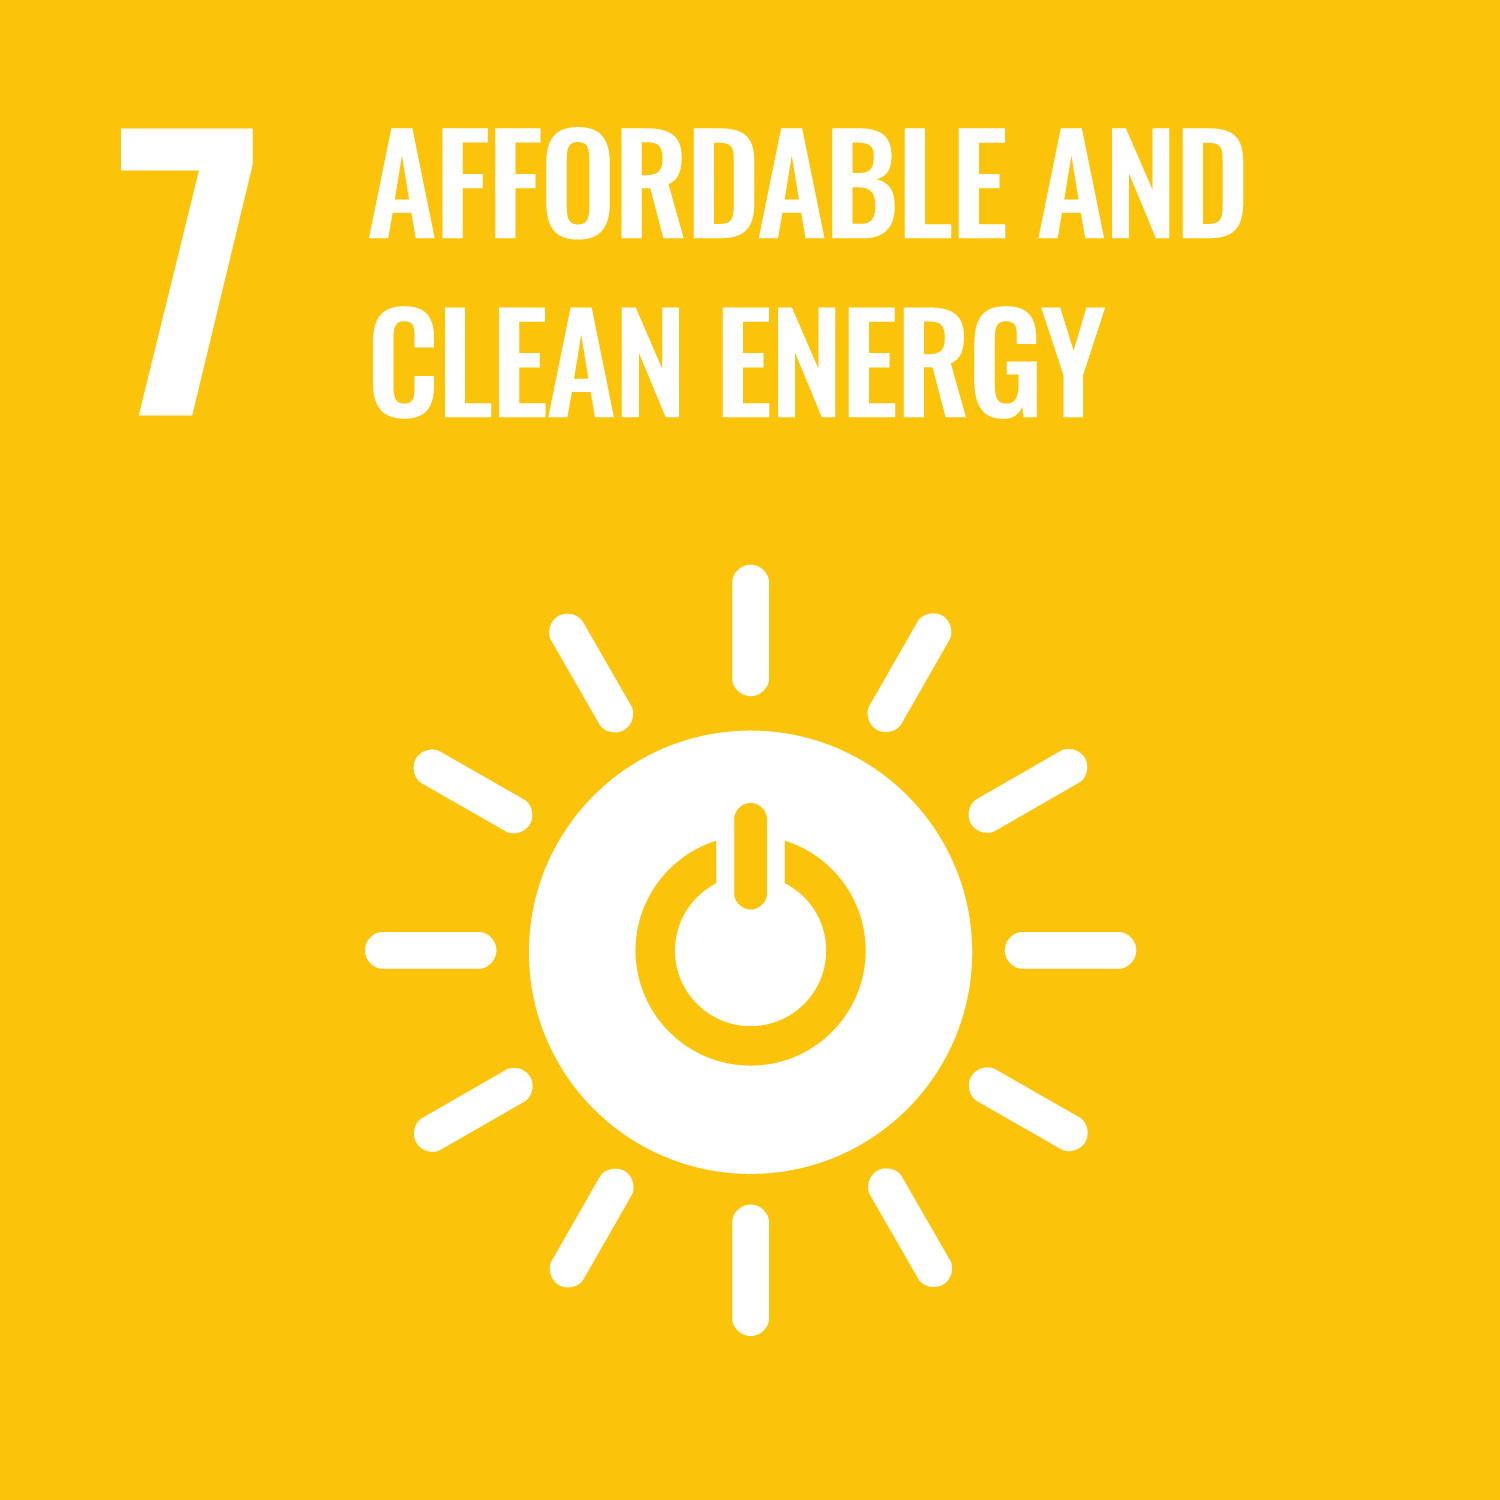 UN sustainability development goal - Affordable and Clean Energy